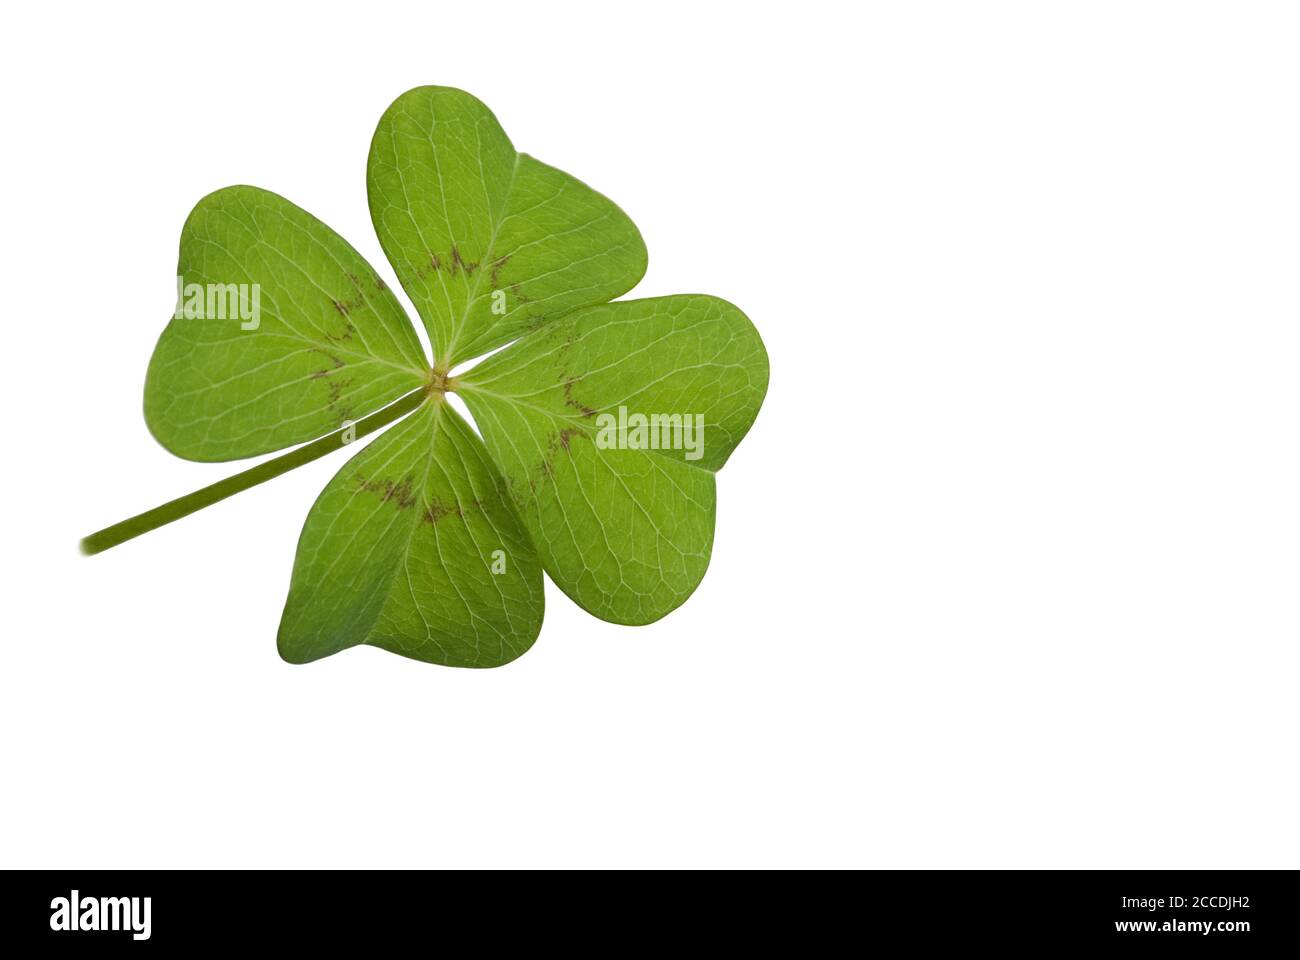 Lucky clover on a white background Stock Photo